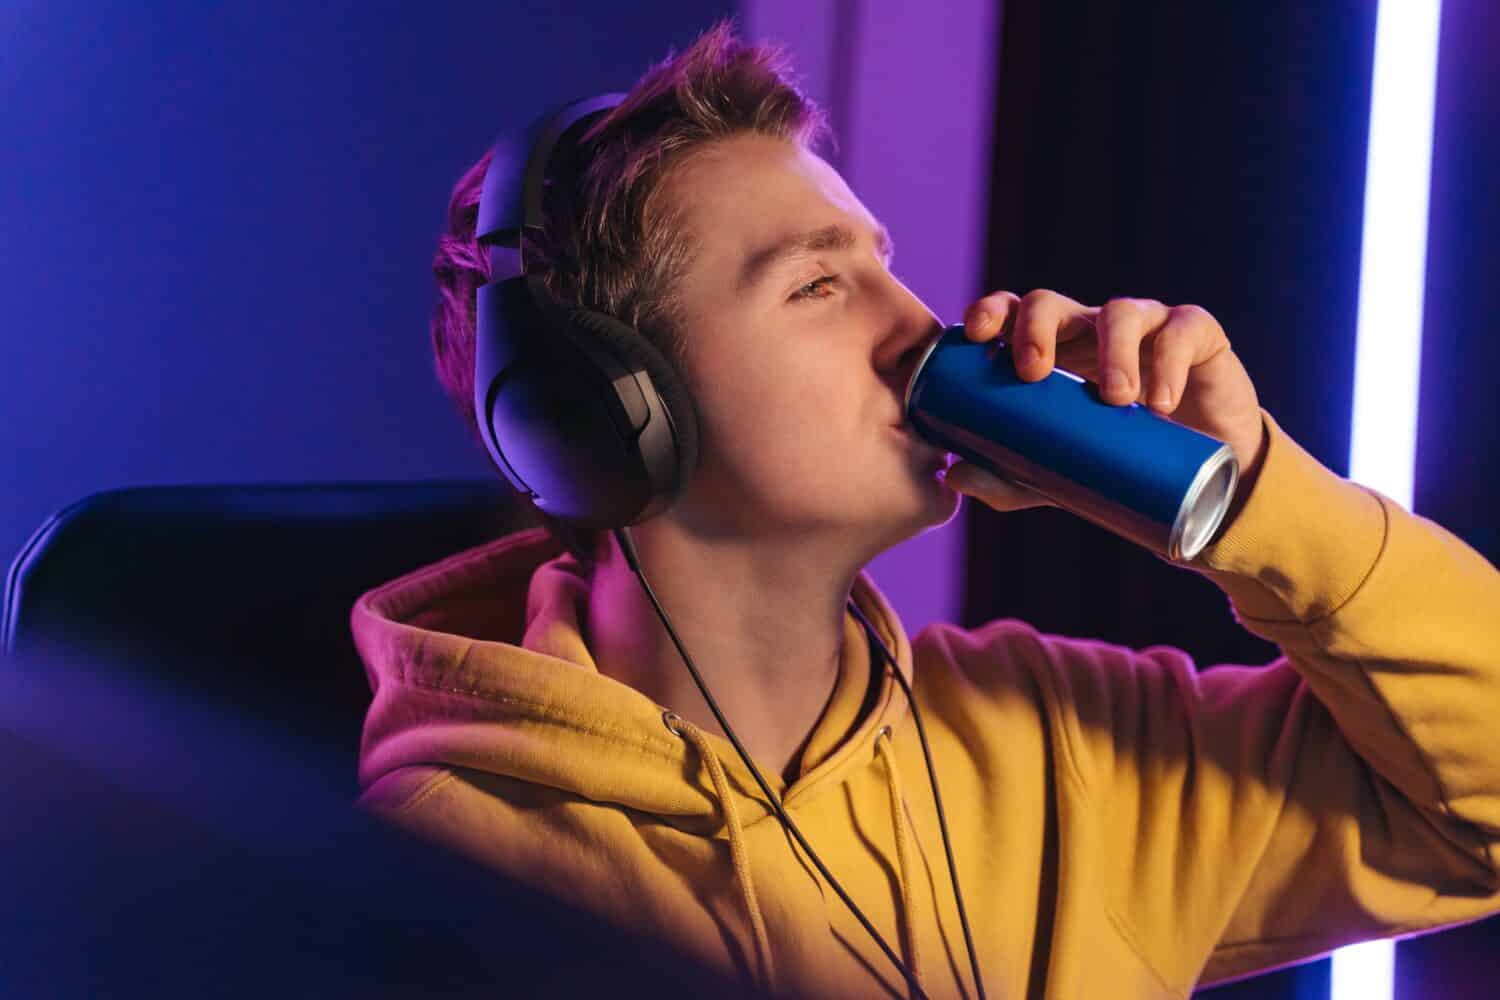 Young professional cybersport gamer playing online video game late at night, drinking caffeine energy drink to wake up and concentrate, focus on multiplay tournament. Games addiction concept